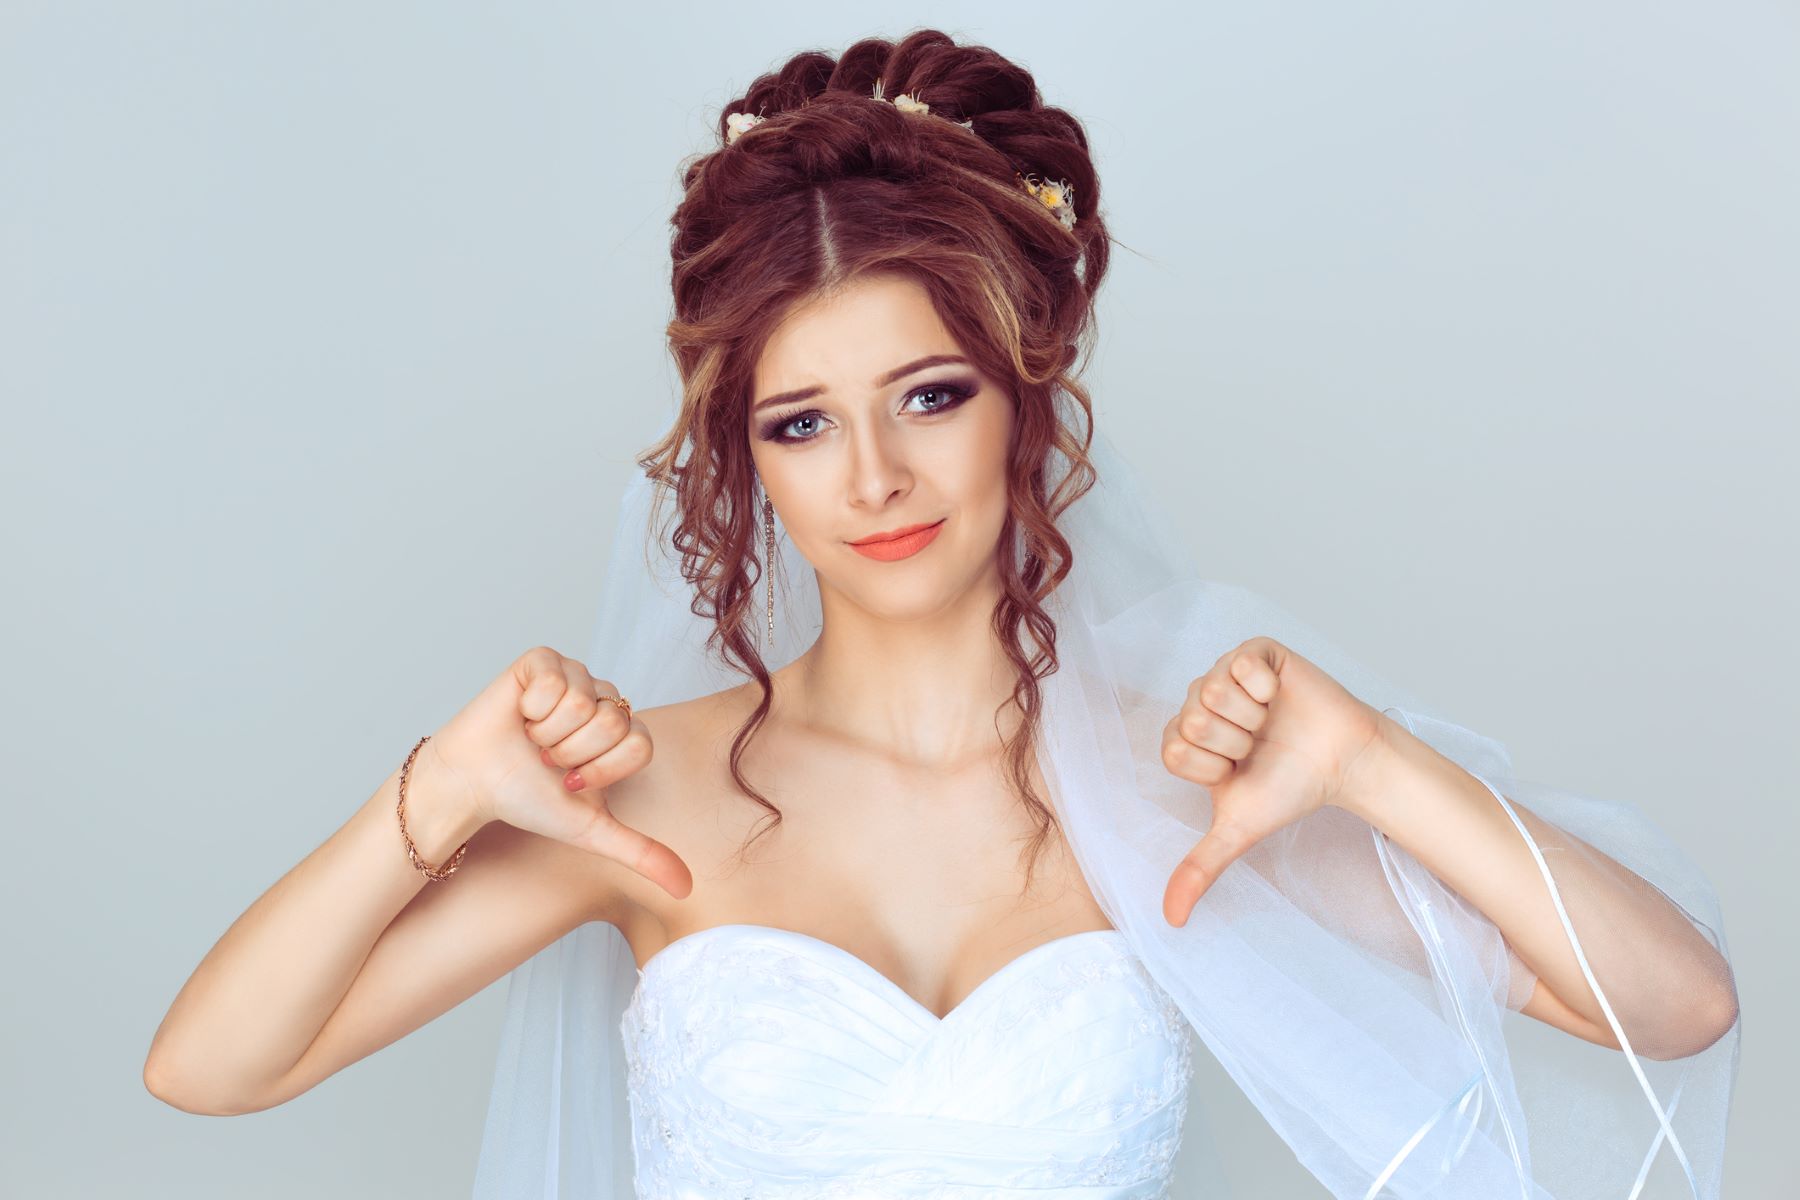 Bride disapproving of wedding hairstyle